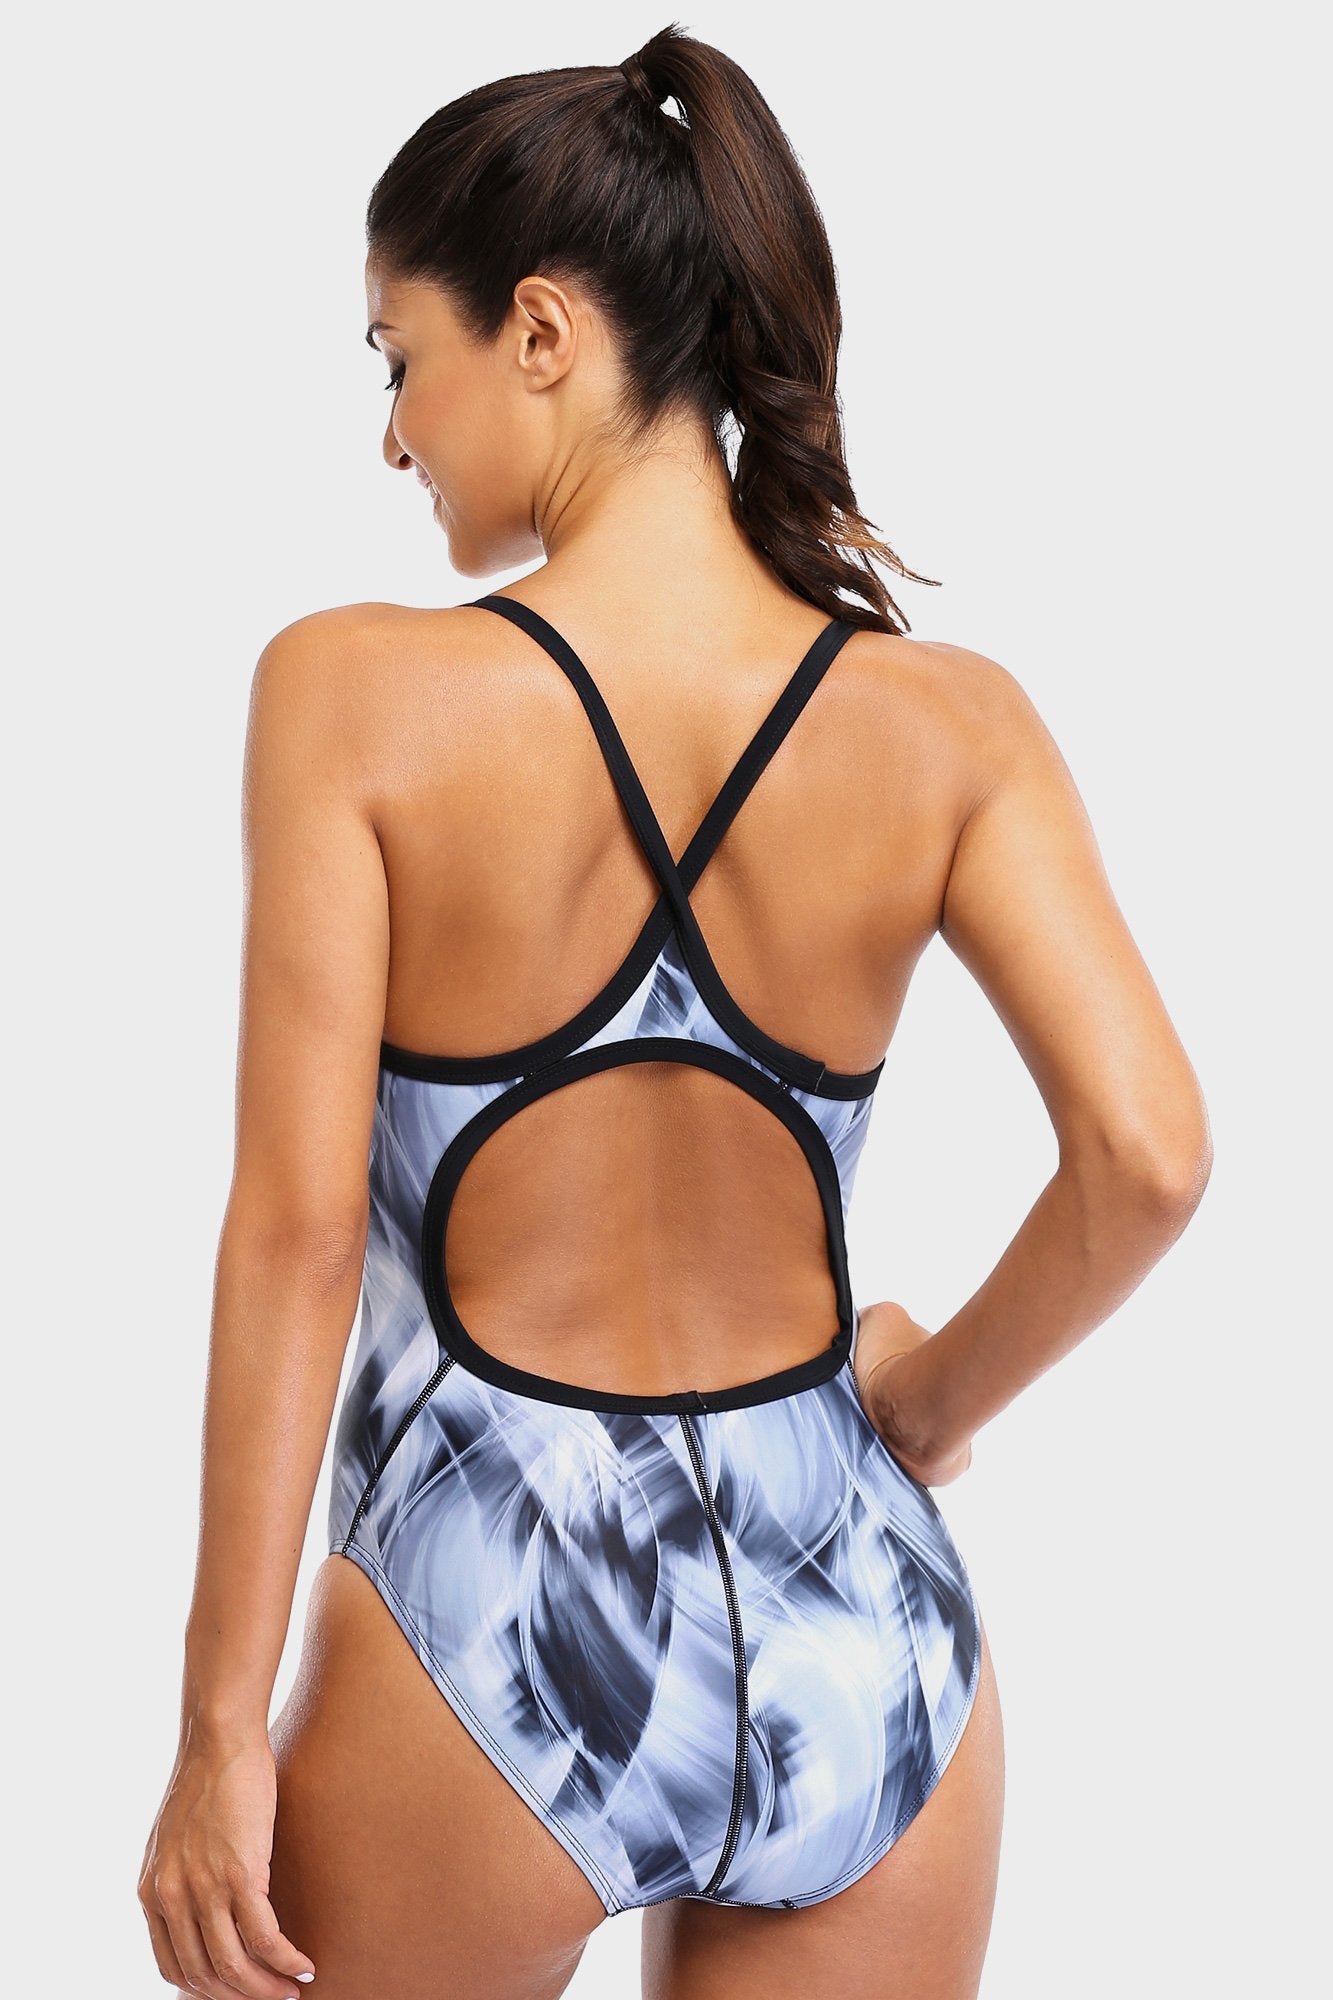 Attraco Gray Sporty Colorful One Piece Swimsuit-Attraco | Fashion Outdoor Clothing